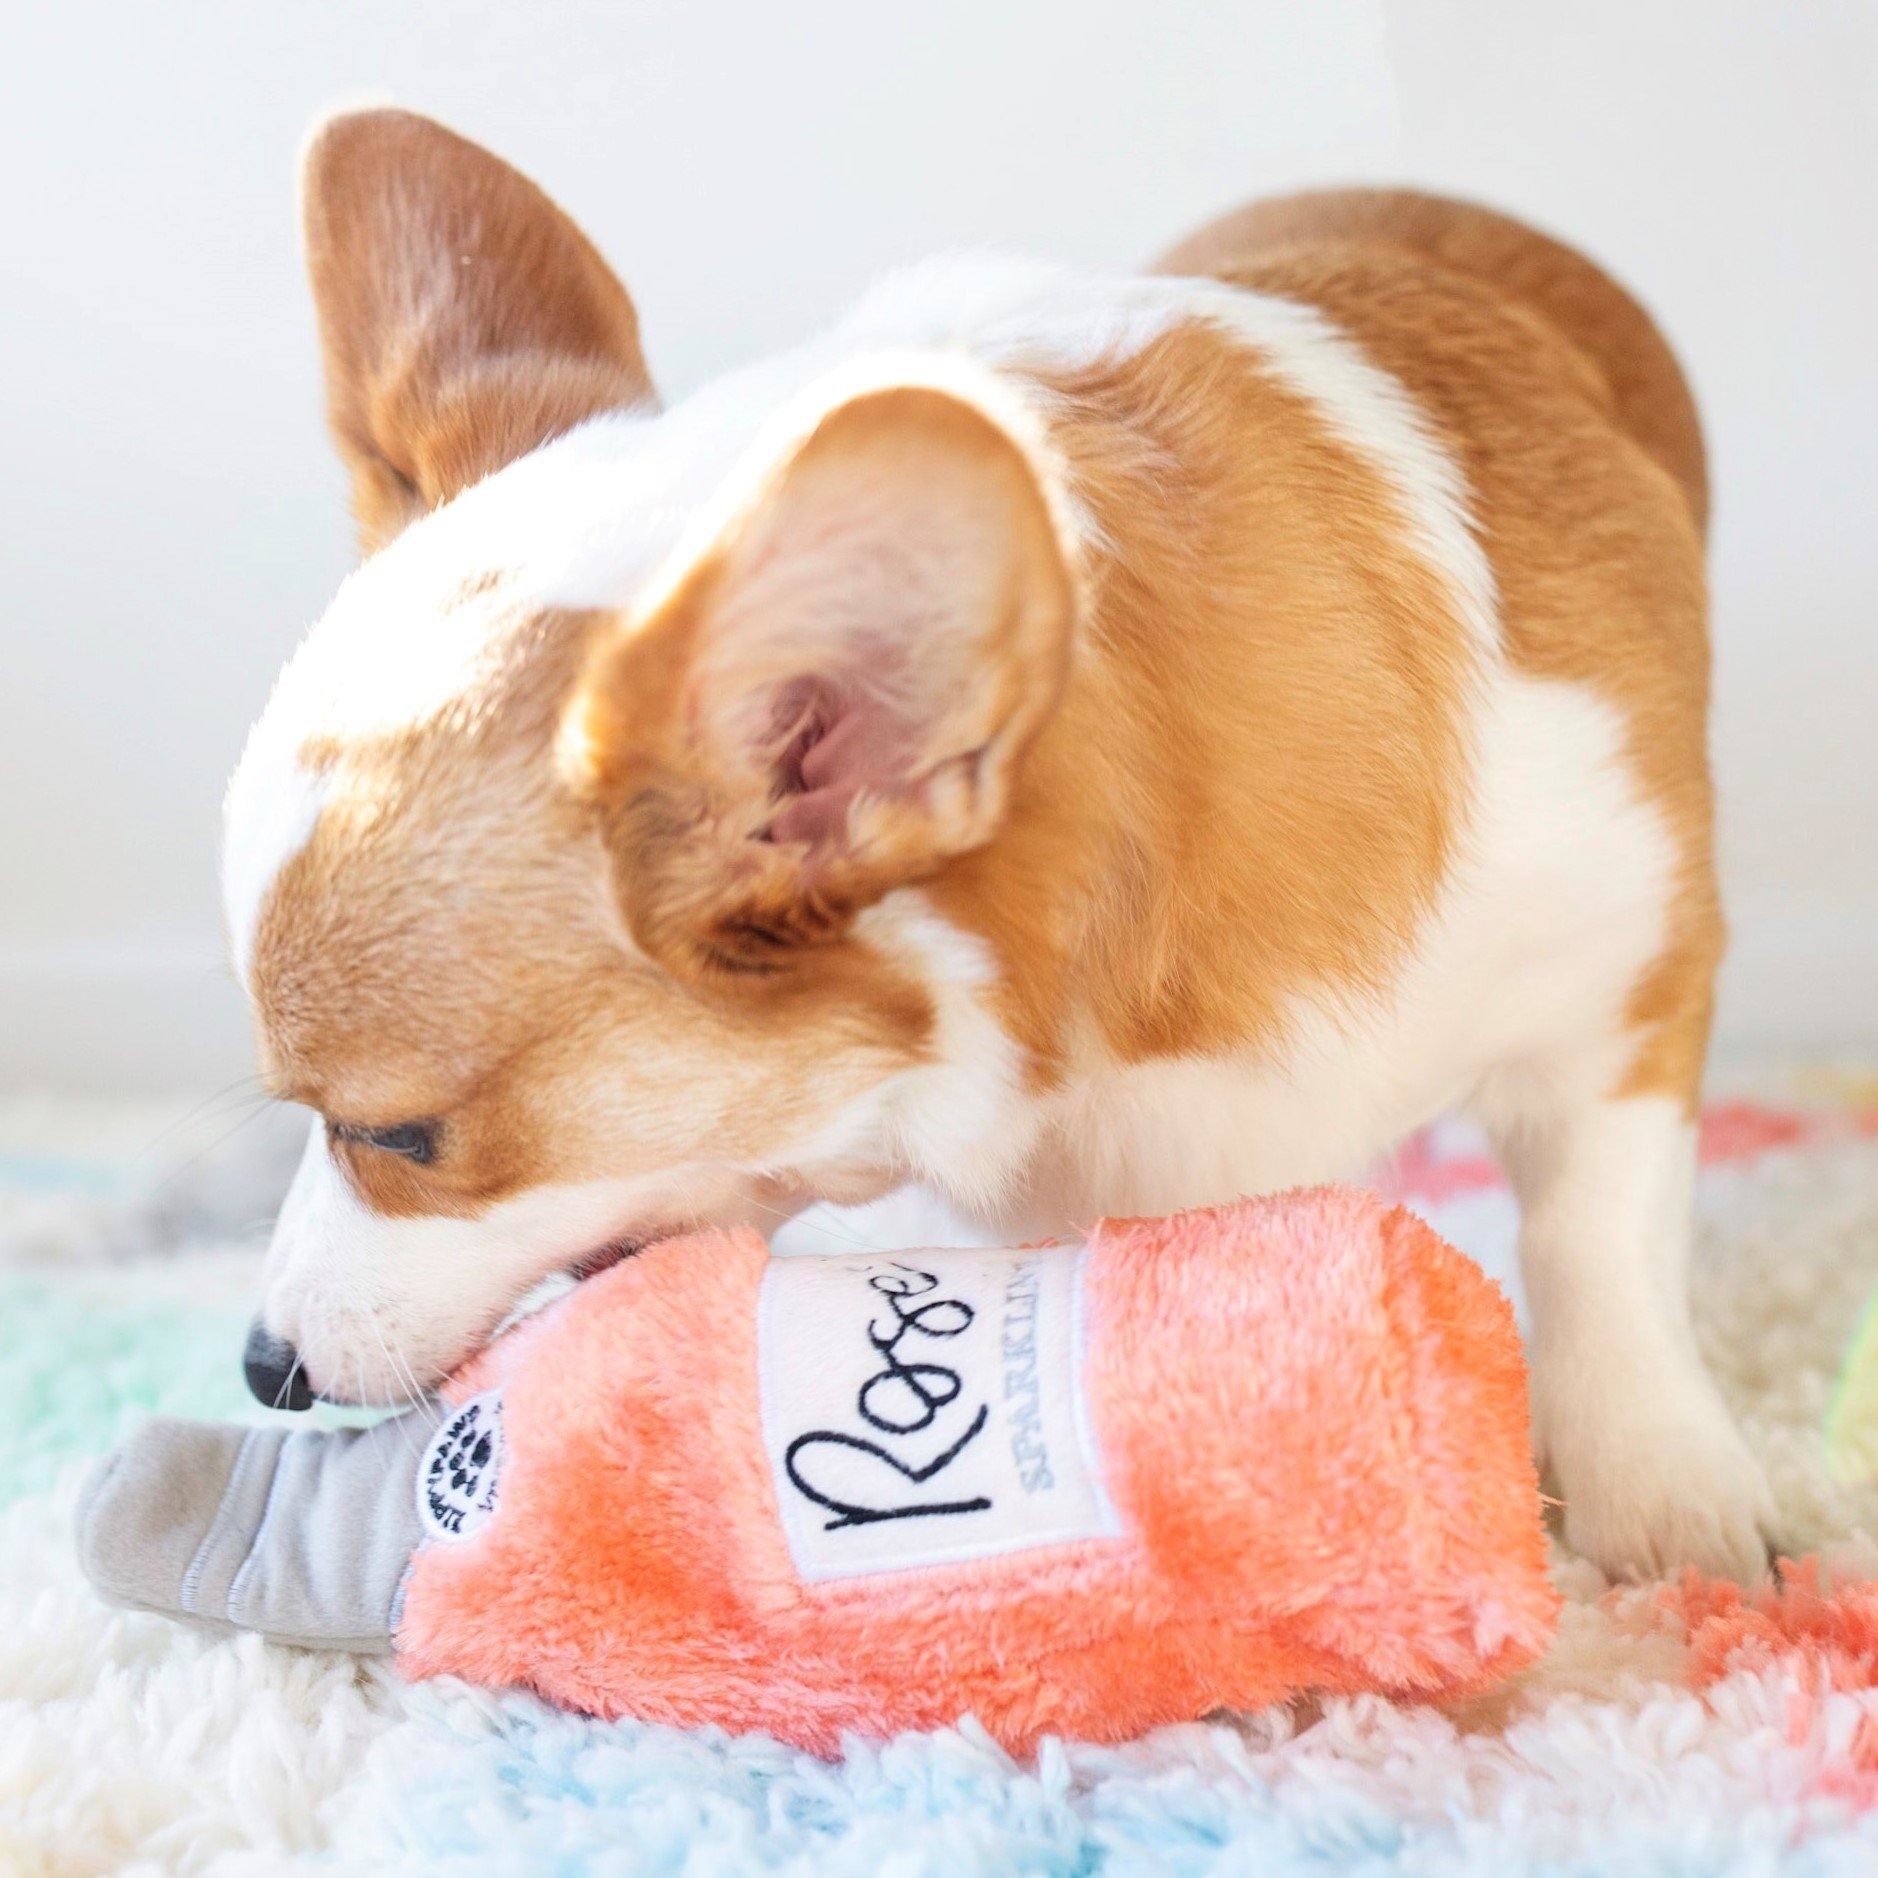 A corgi chewing on the toy